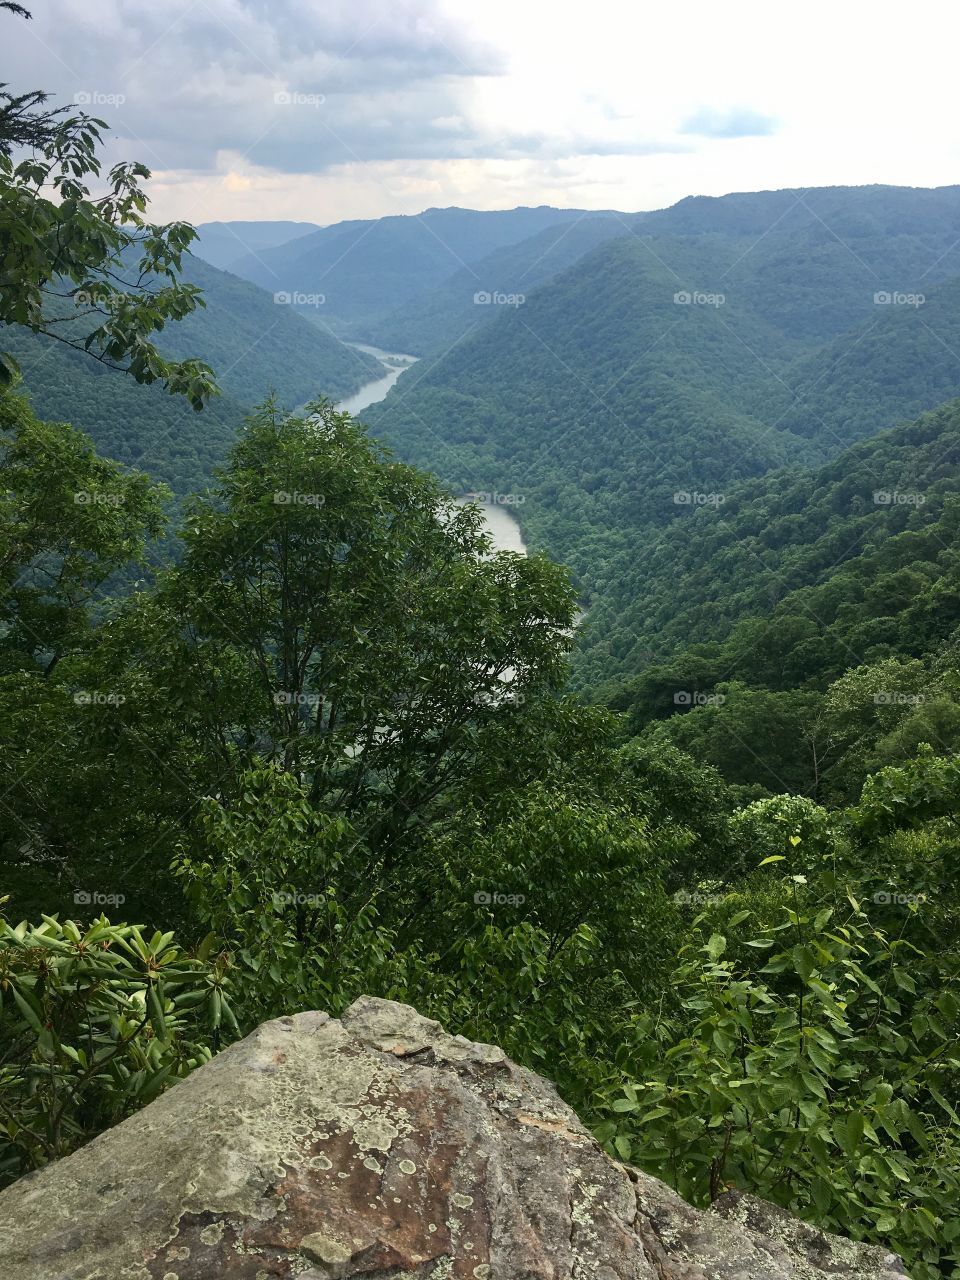 The Grand View WV